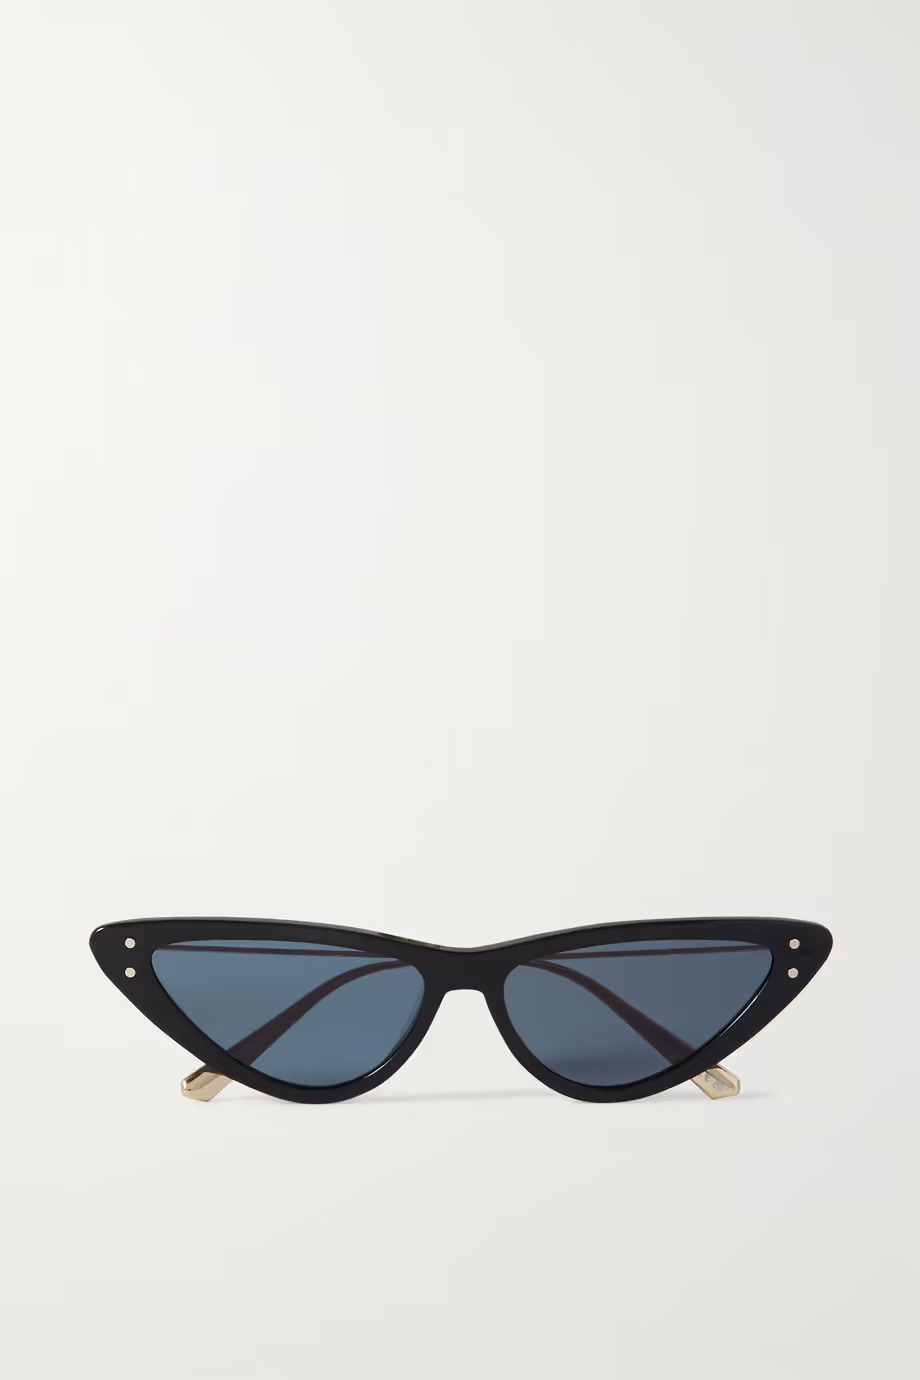 MissDior cat-eye acetate and gold-tone sunglasses from Dior